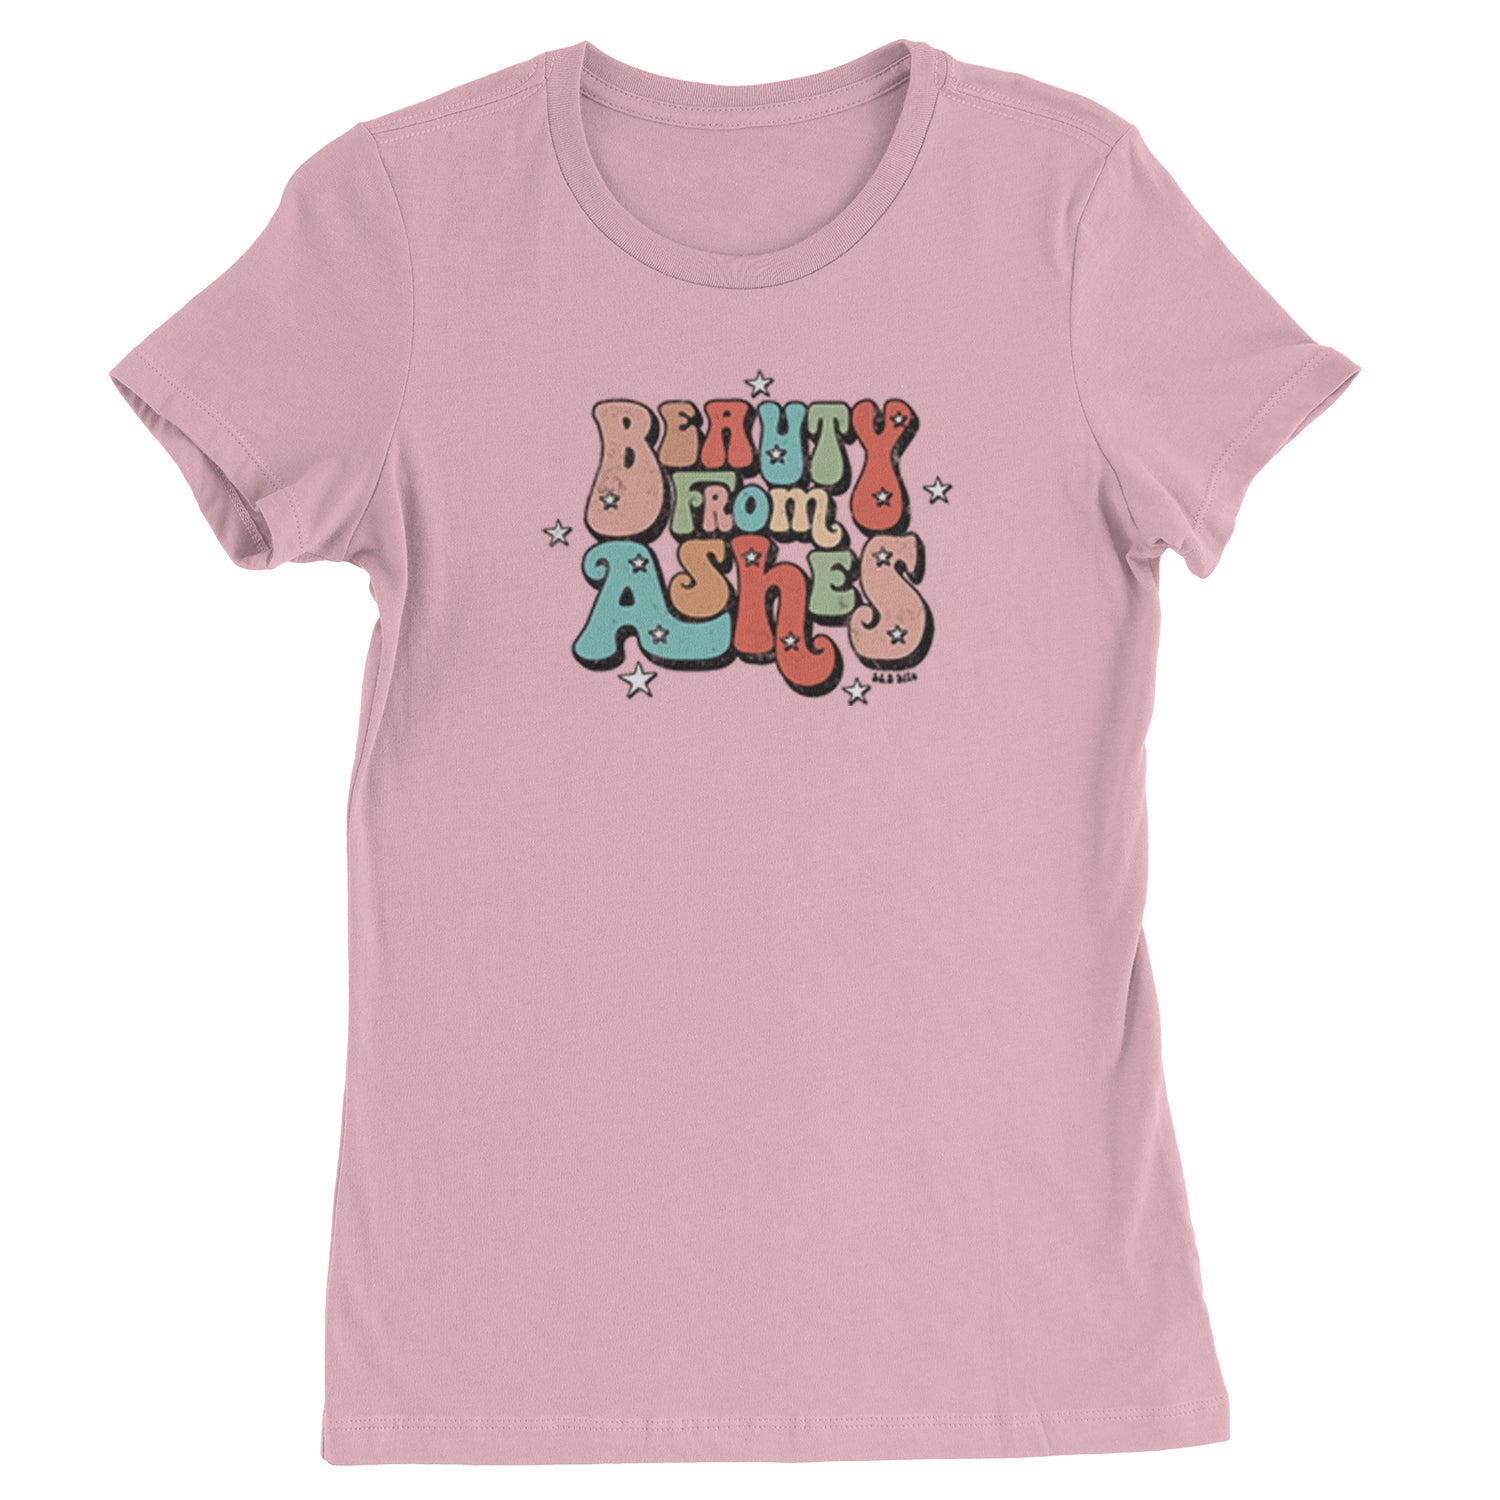 Beauty From Ashes Womens T-shirt